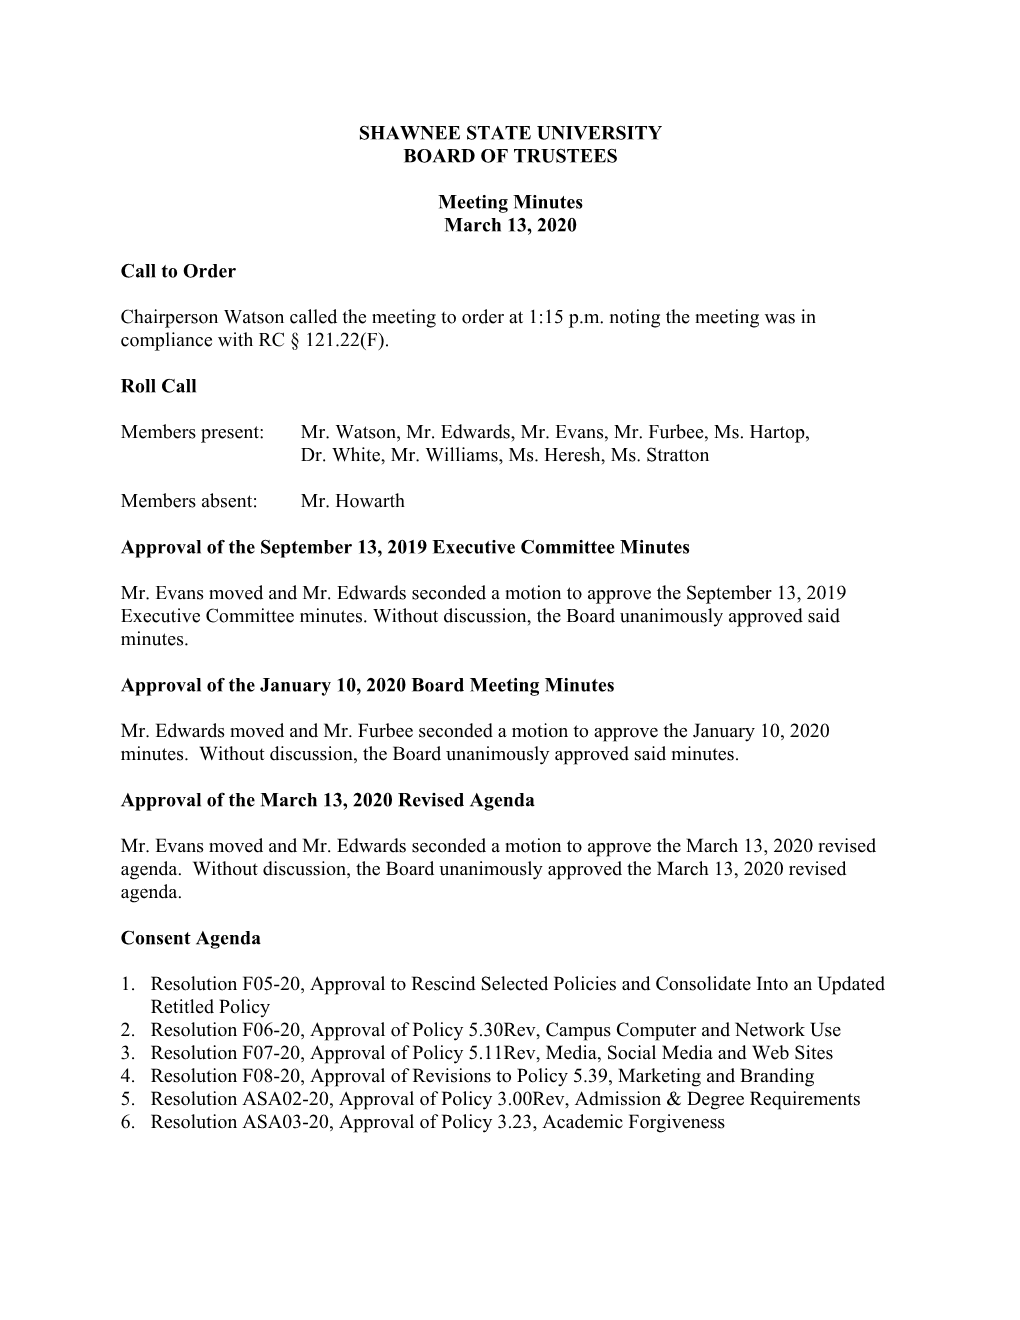 March 13, 2020 BOT Meeting Minutes